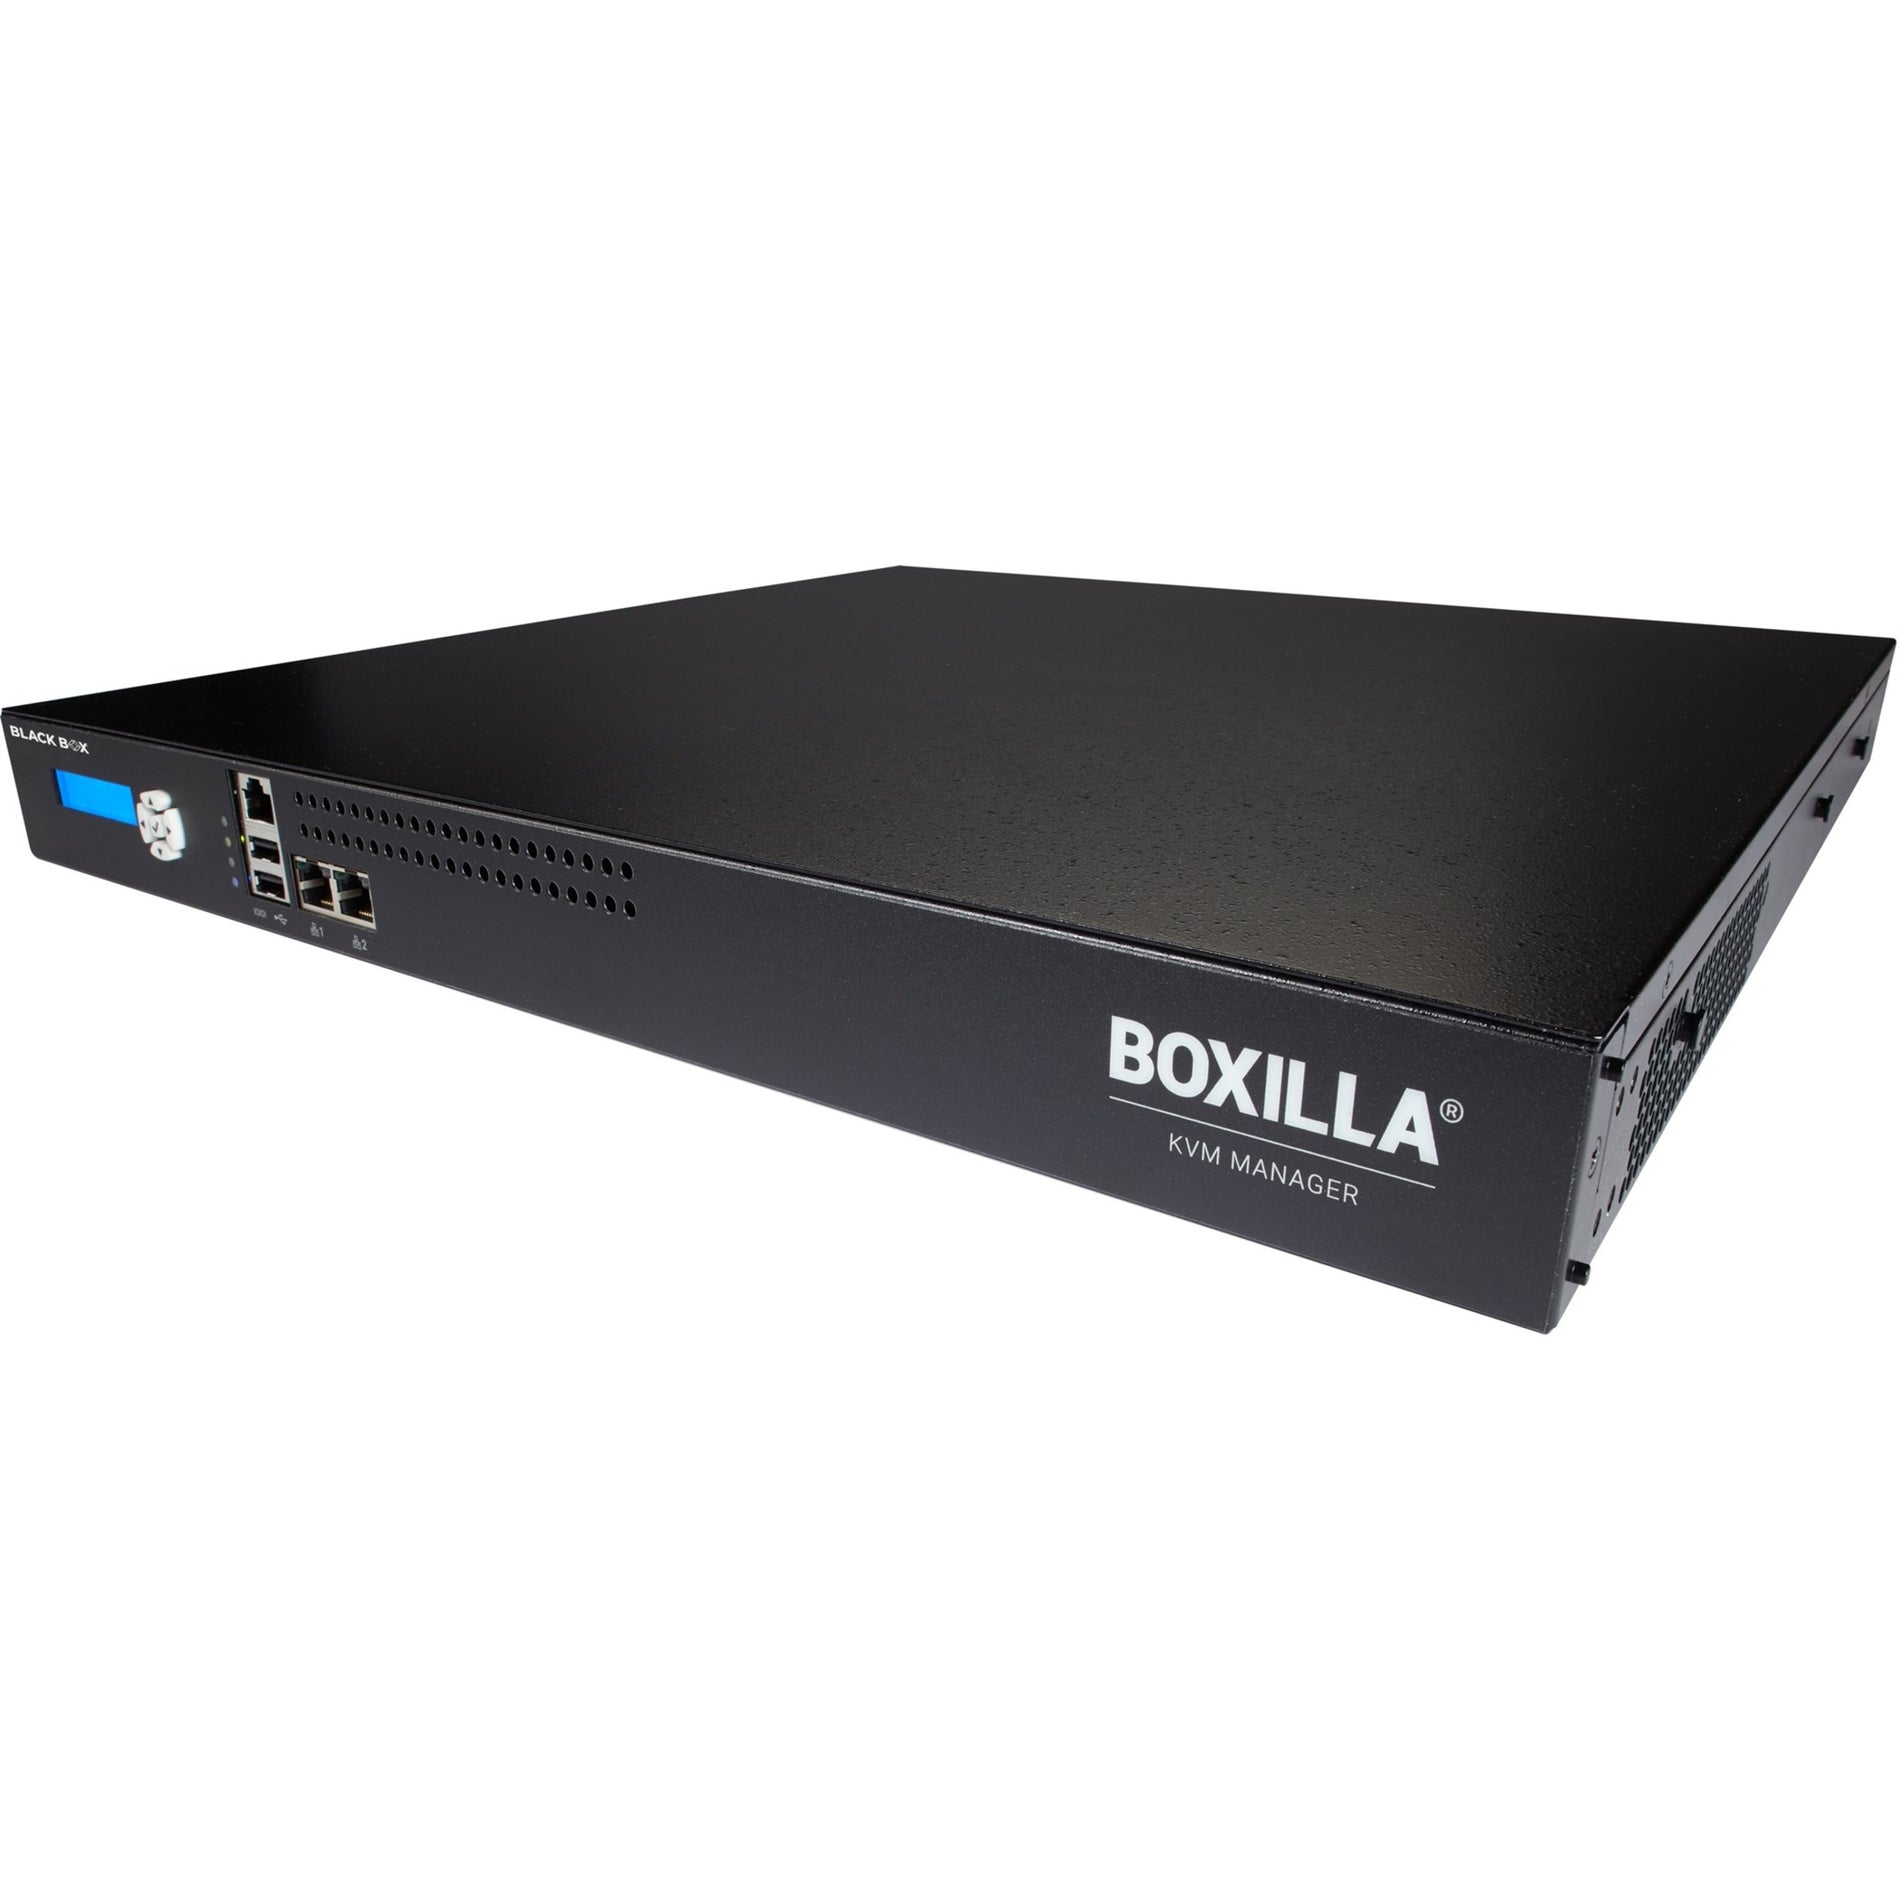 Black Box BXAMGR-R2-225 Boxilla KVM Manager with 225-Device License, USB, Network (RJ-45), TAA Compliant, RoHS 2, RoHS, WEEE, Rack-mountable, 1U